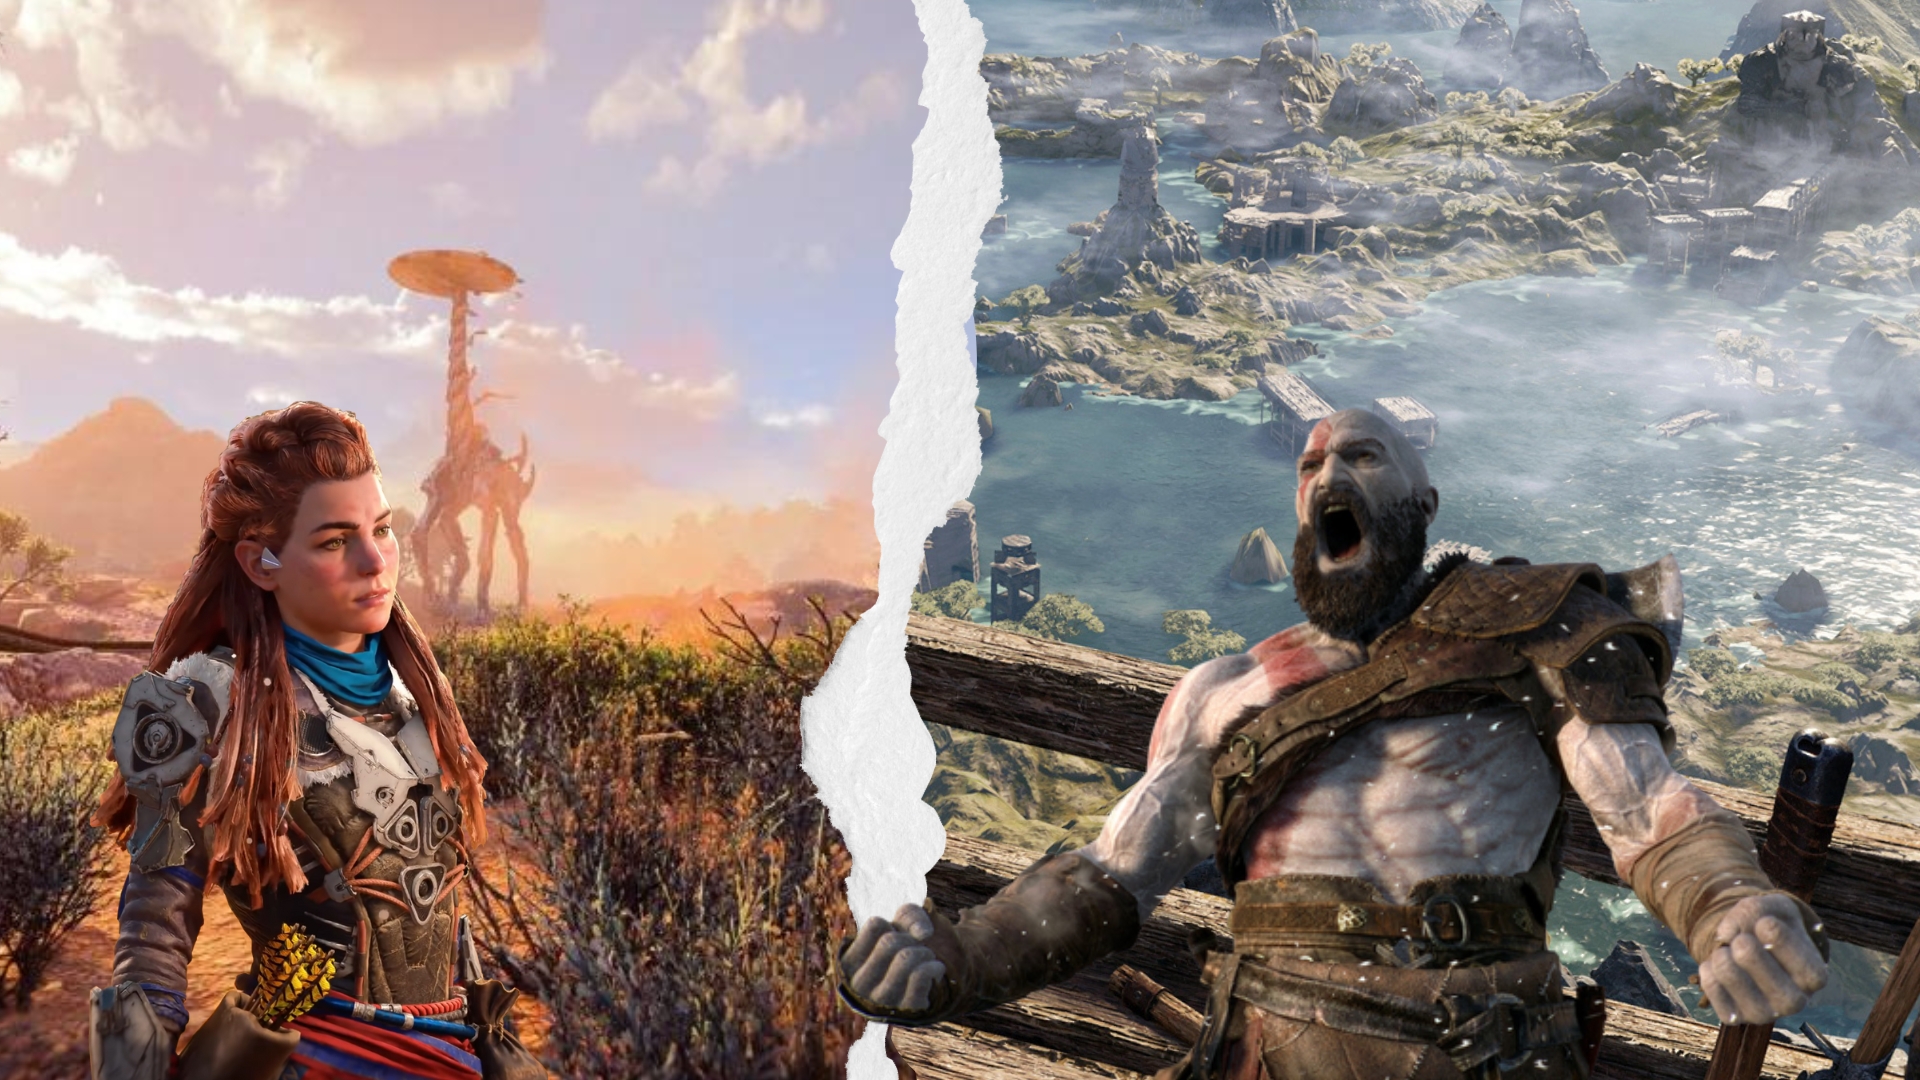 Why does the God of War Ragnarok look like Assassin Creed's